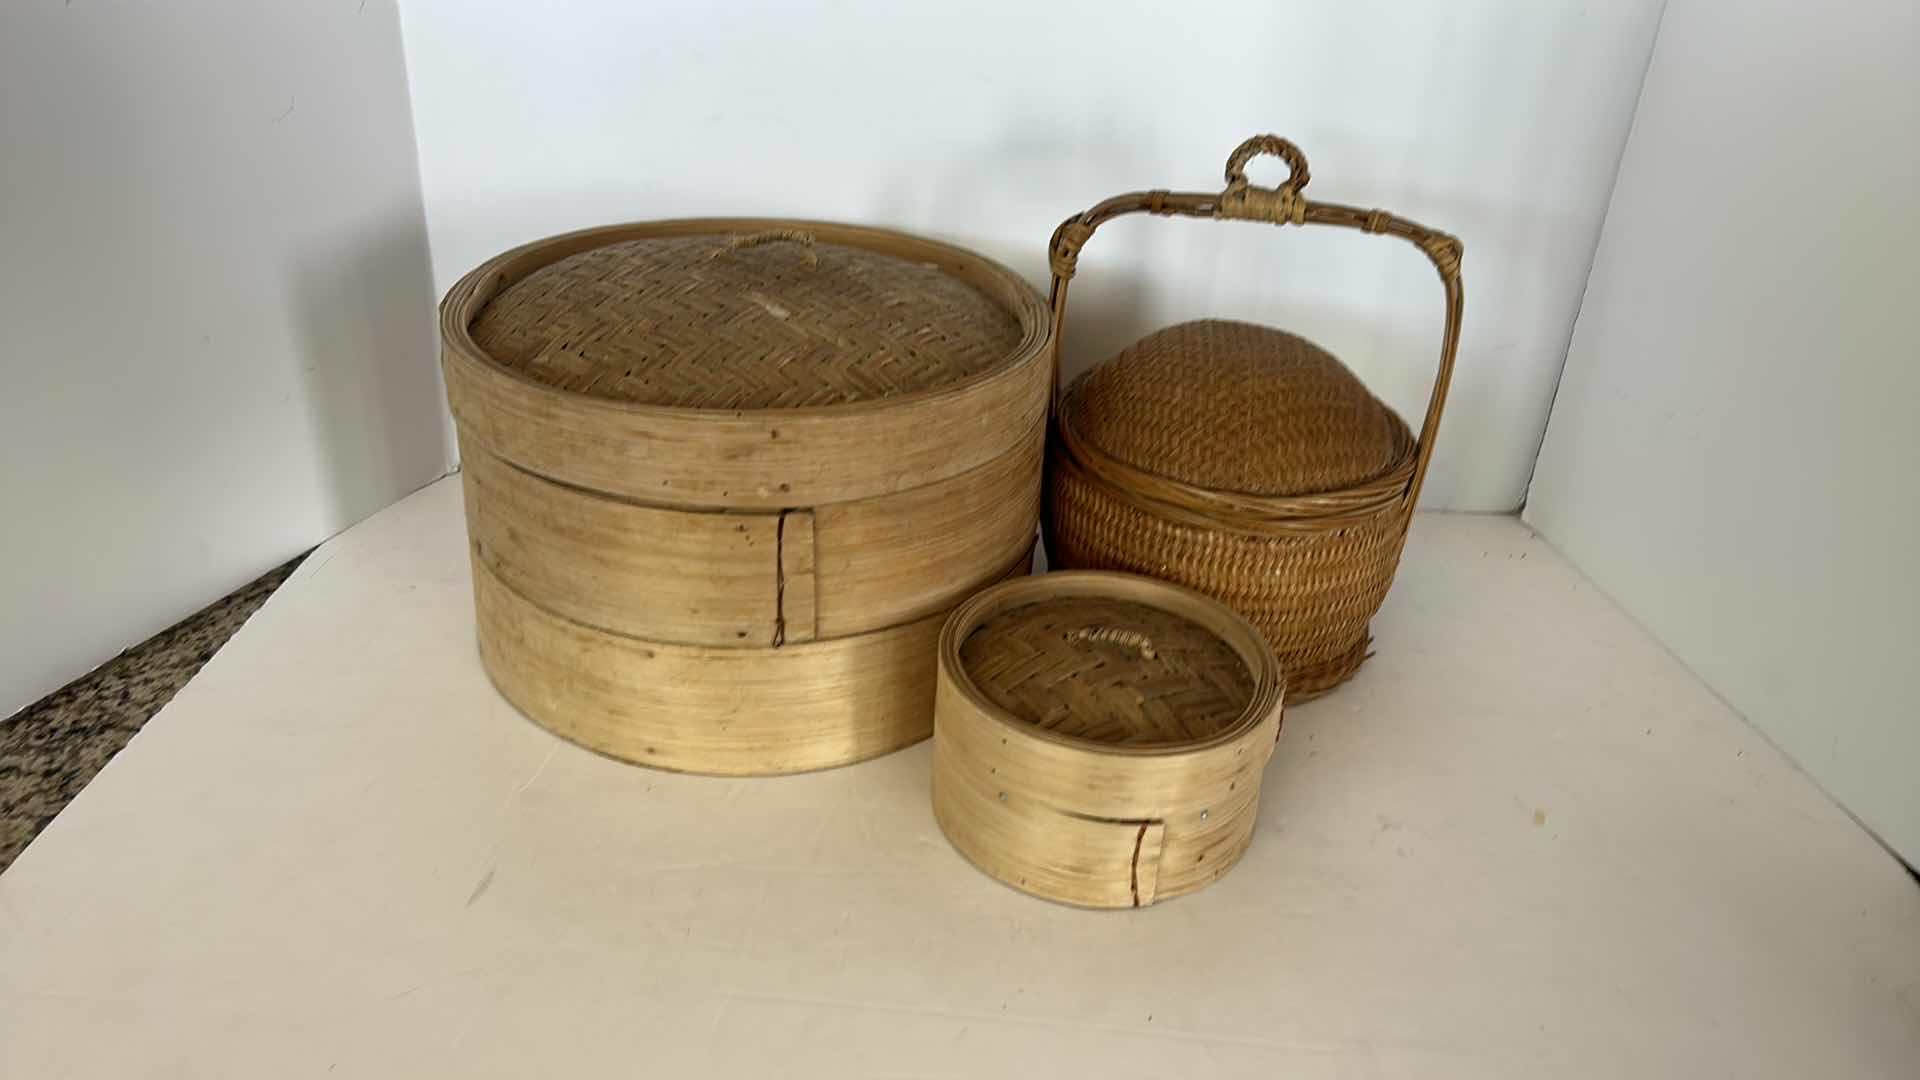 Photo 2 of 3 - CHINESE WICKER VEGTABLE STEAMING BASKETS.  LARGEST 10 1/2” x 7”